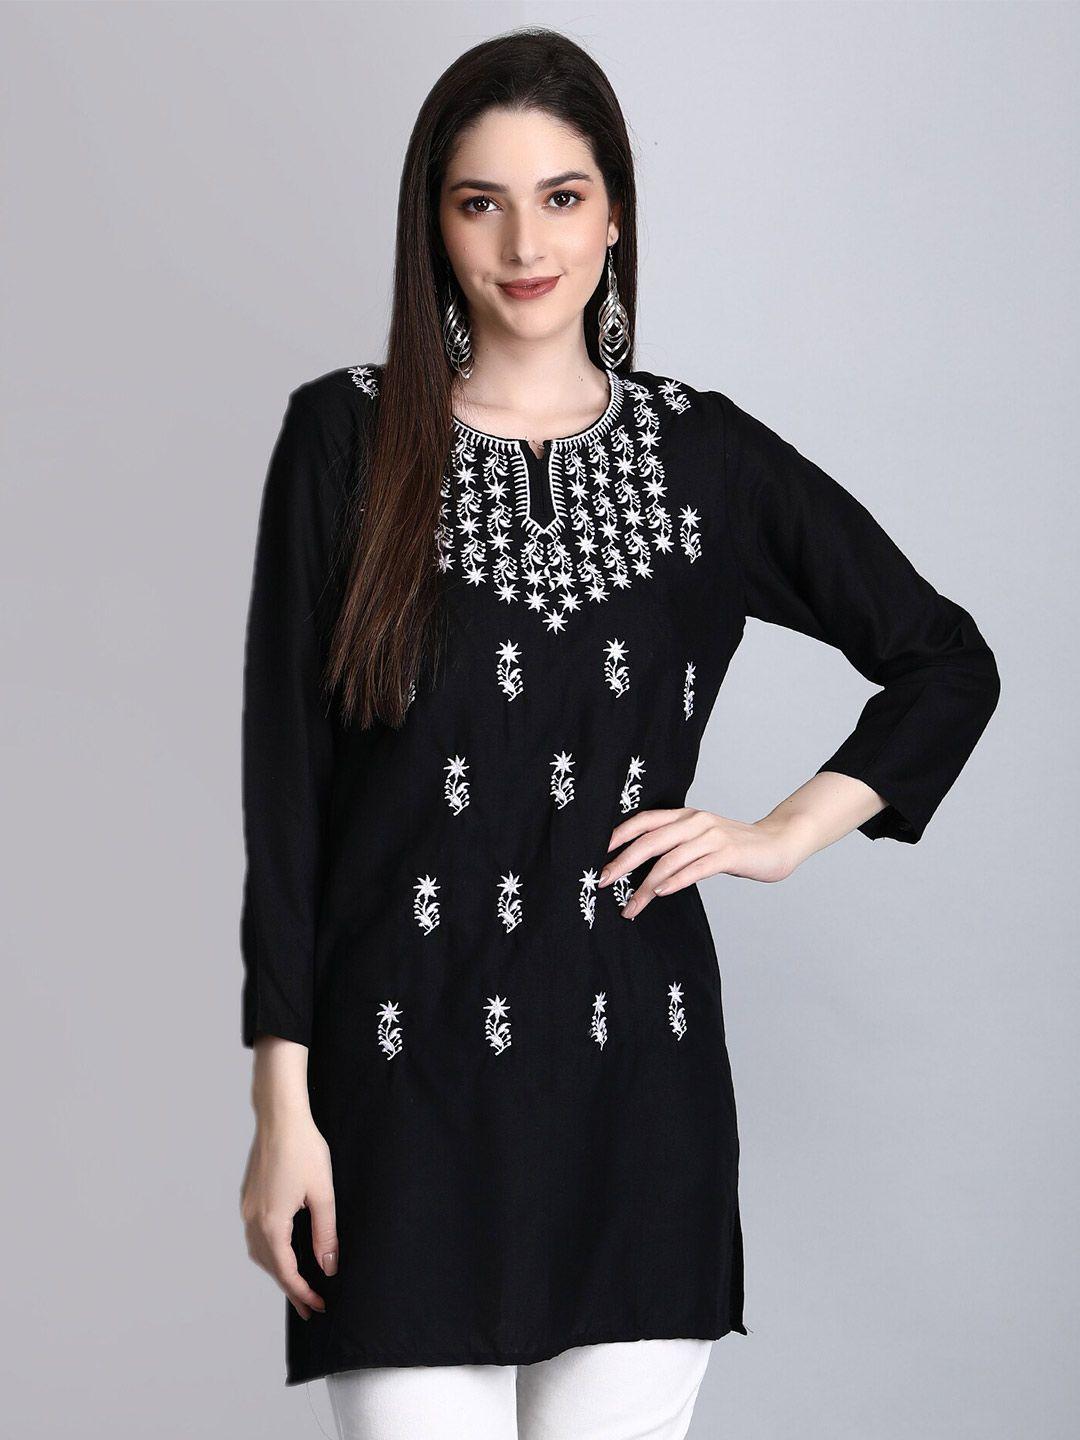 sgrf black embroidered top